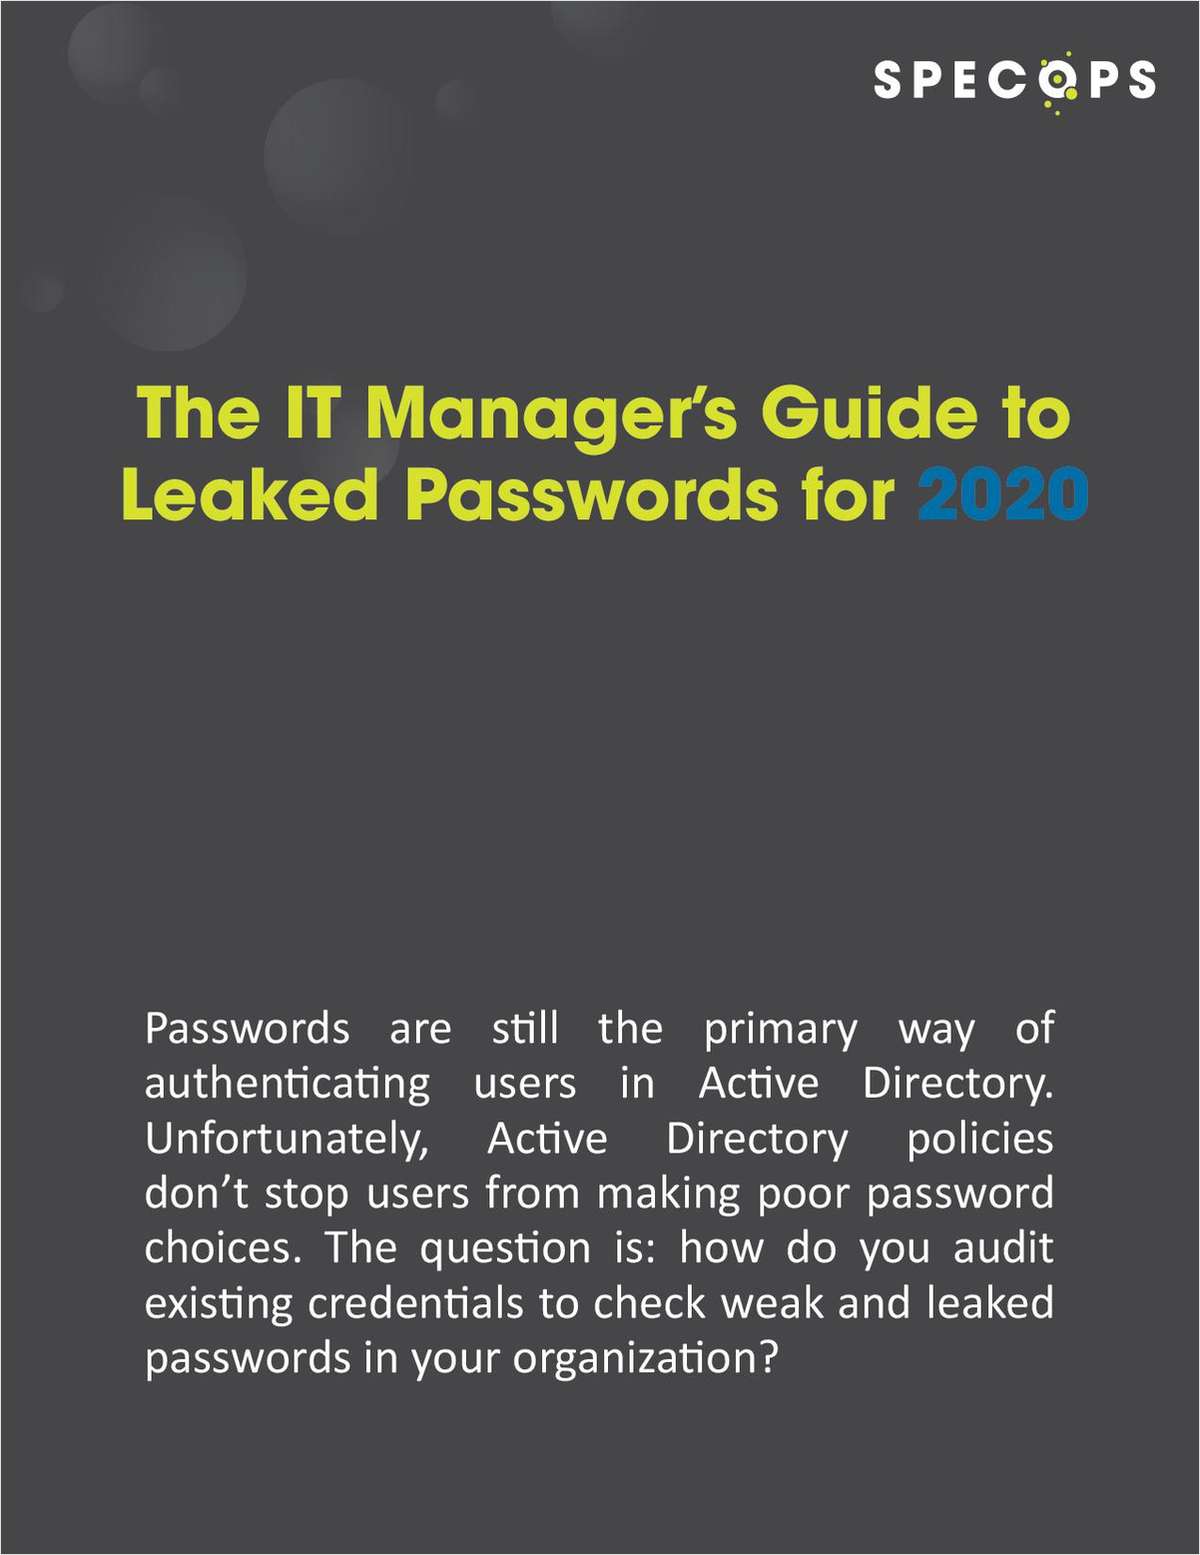 The IT Manager's Guide To Leaked Passwords For 2020